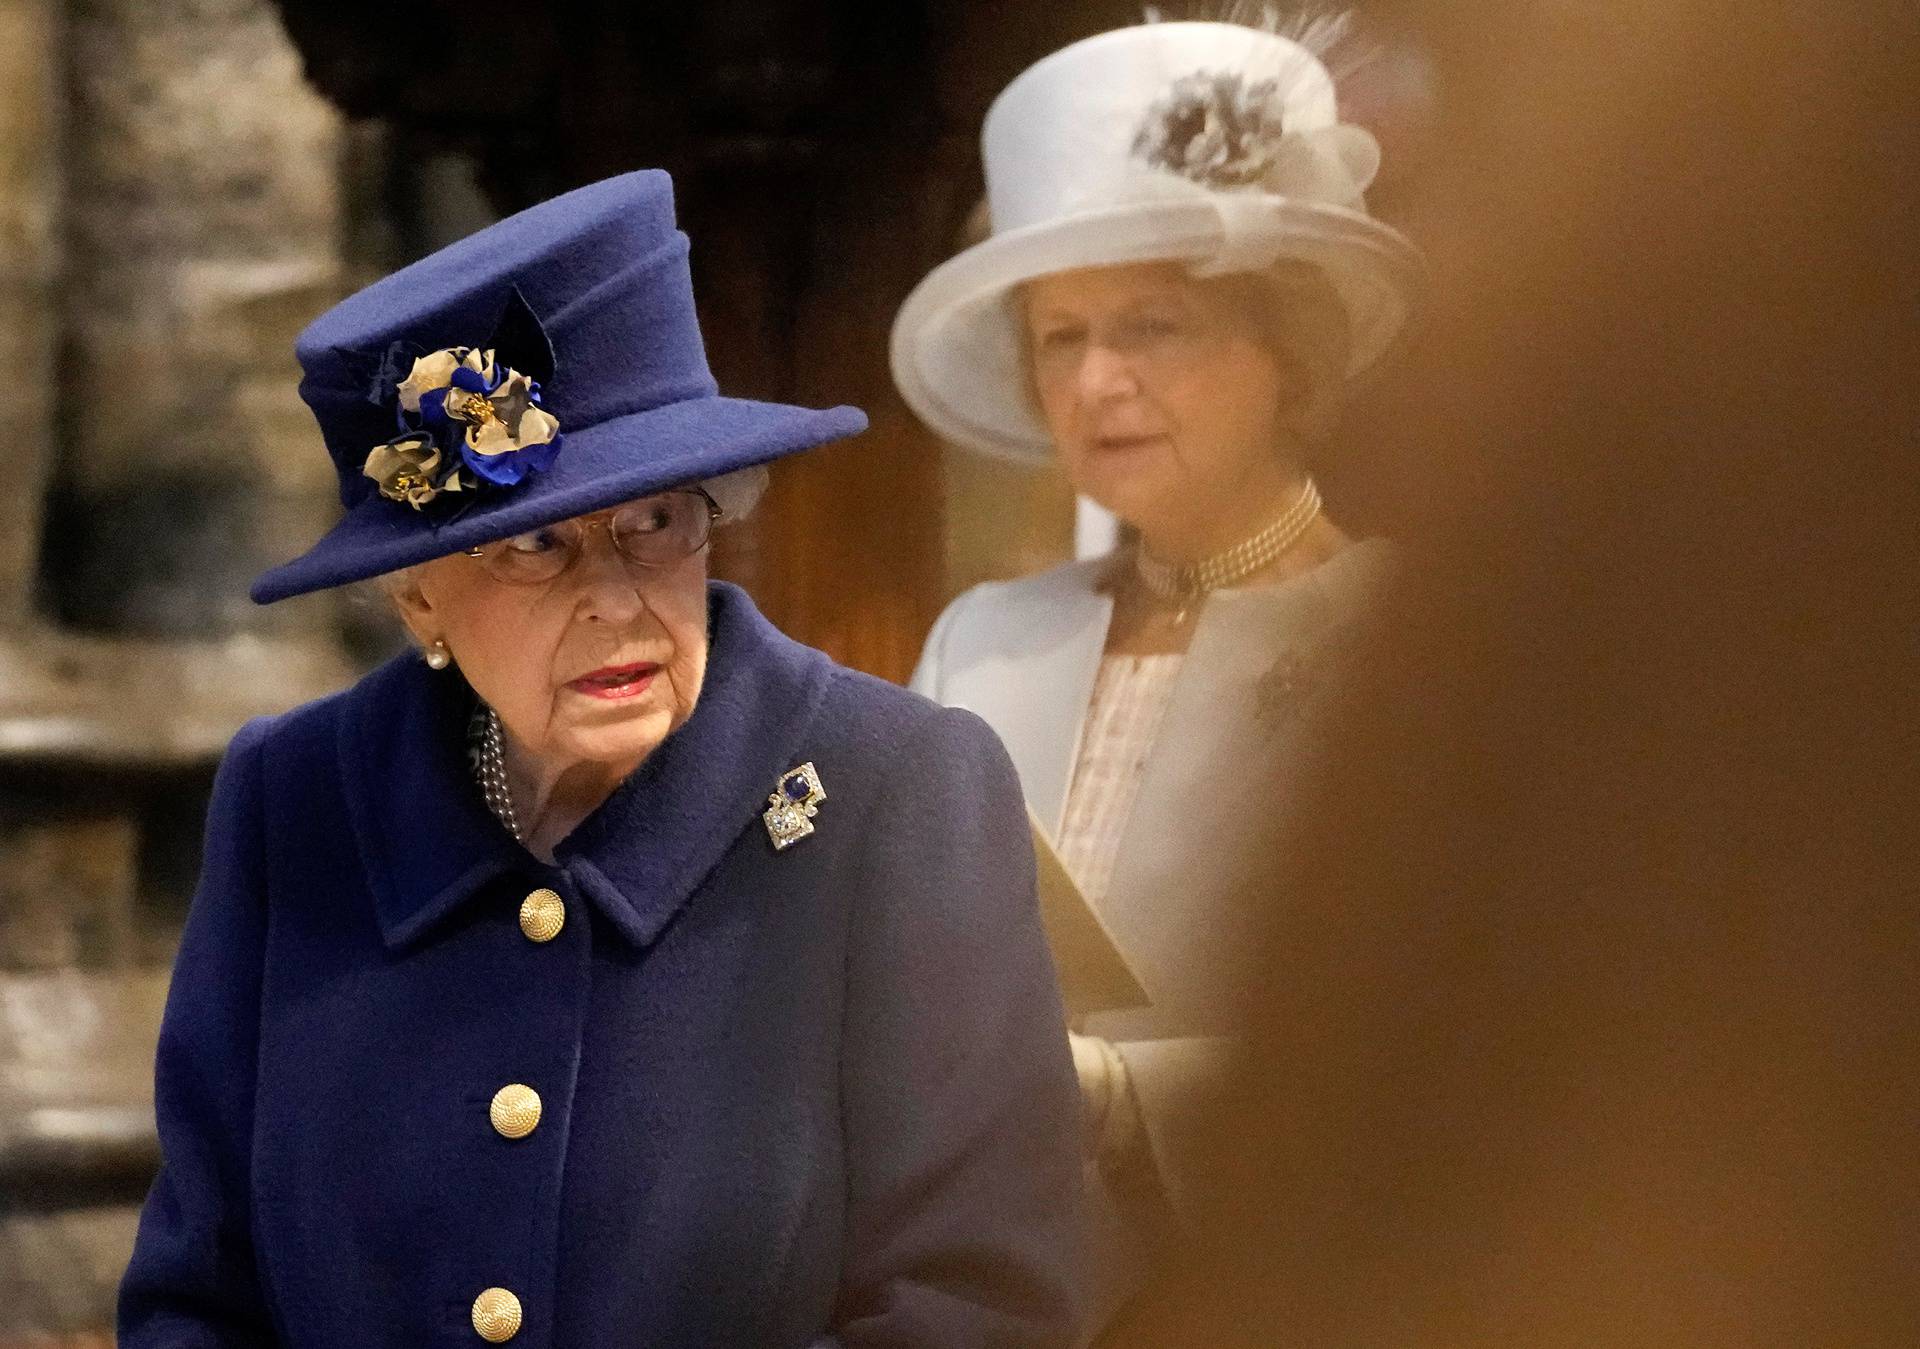 Britain's Queen Elizabeth attends a Service of Thanksgiving to mark the Centenary of the Royal British Legion at Westminster Abbey